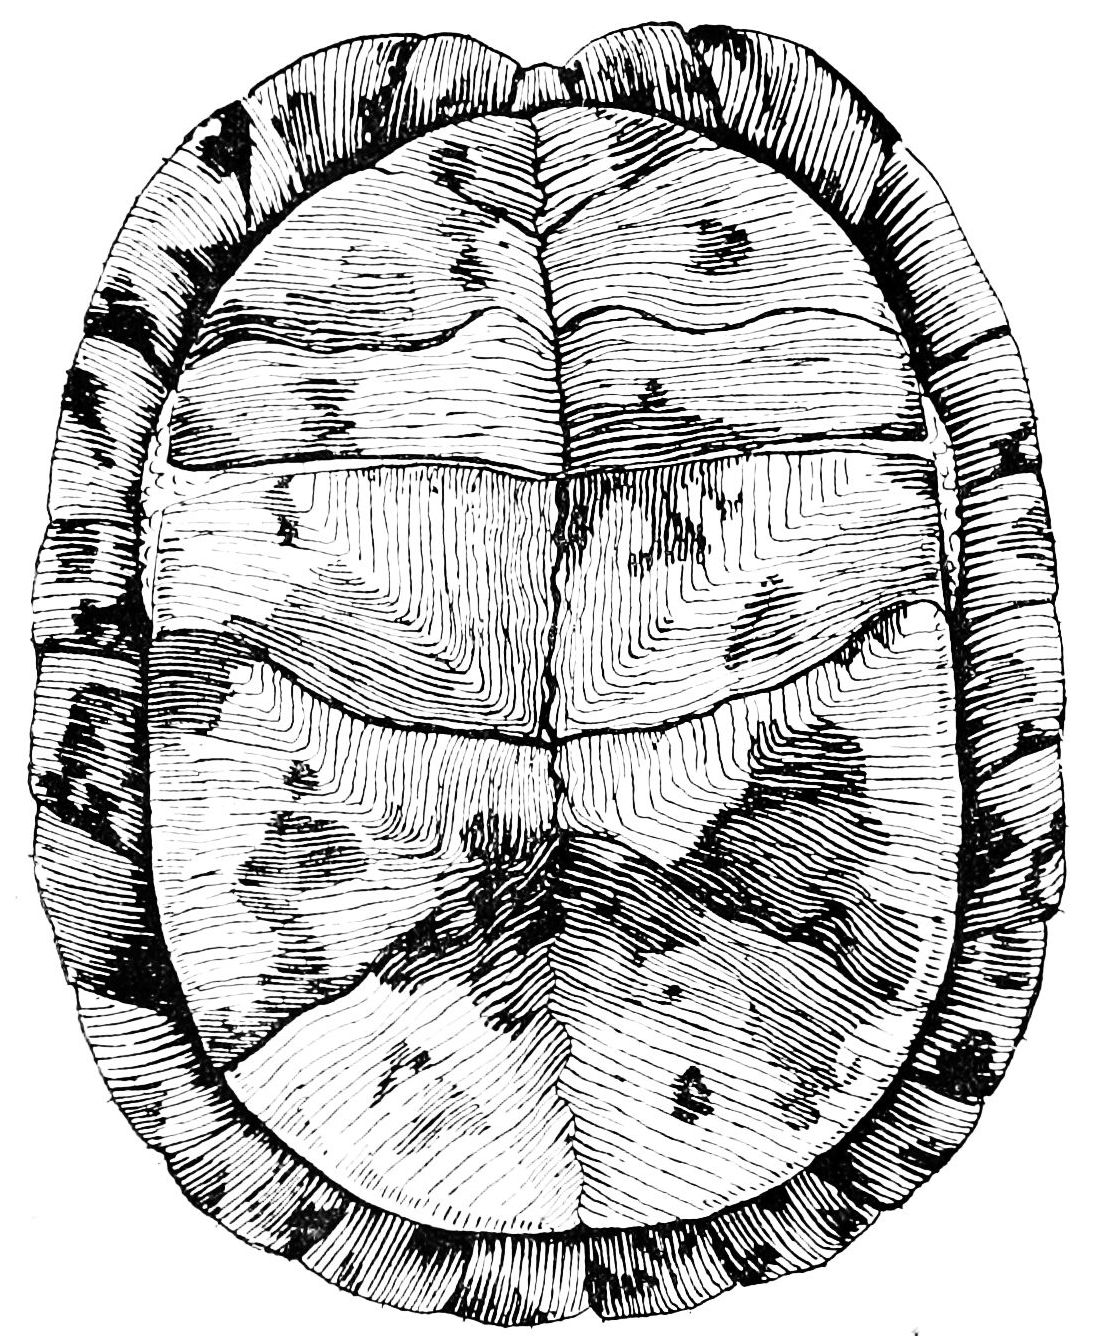 Pictures Of Turtle Shells - ClipArt Best